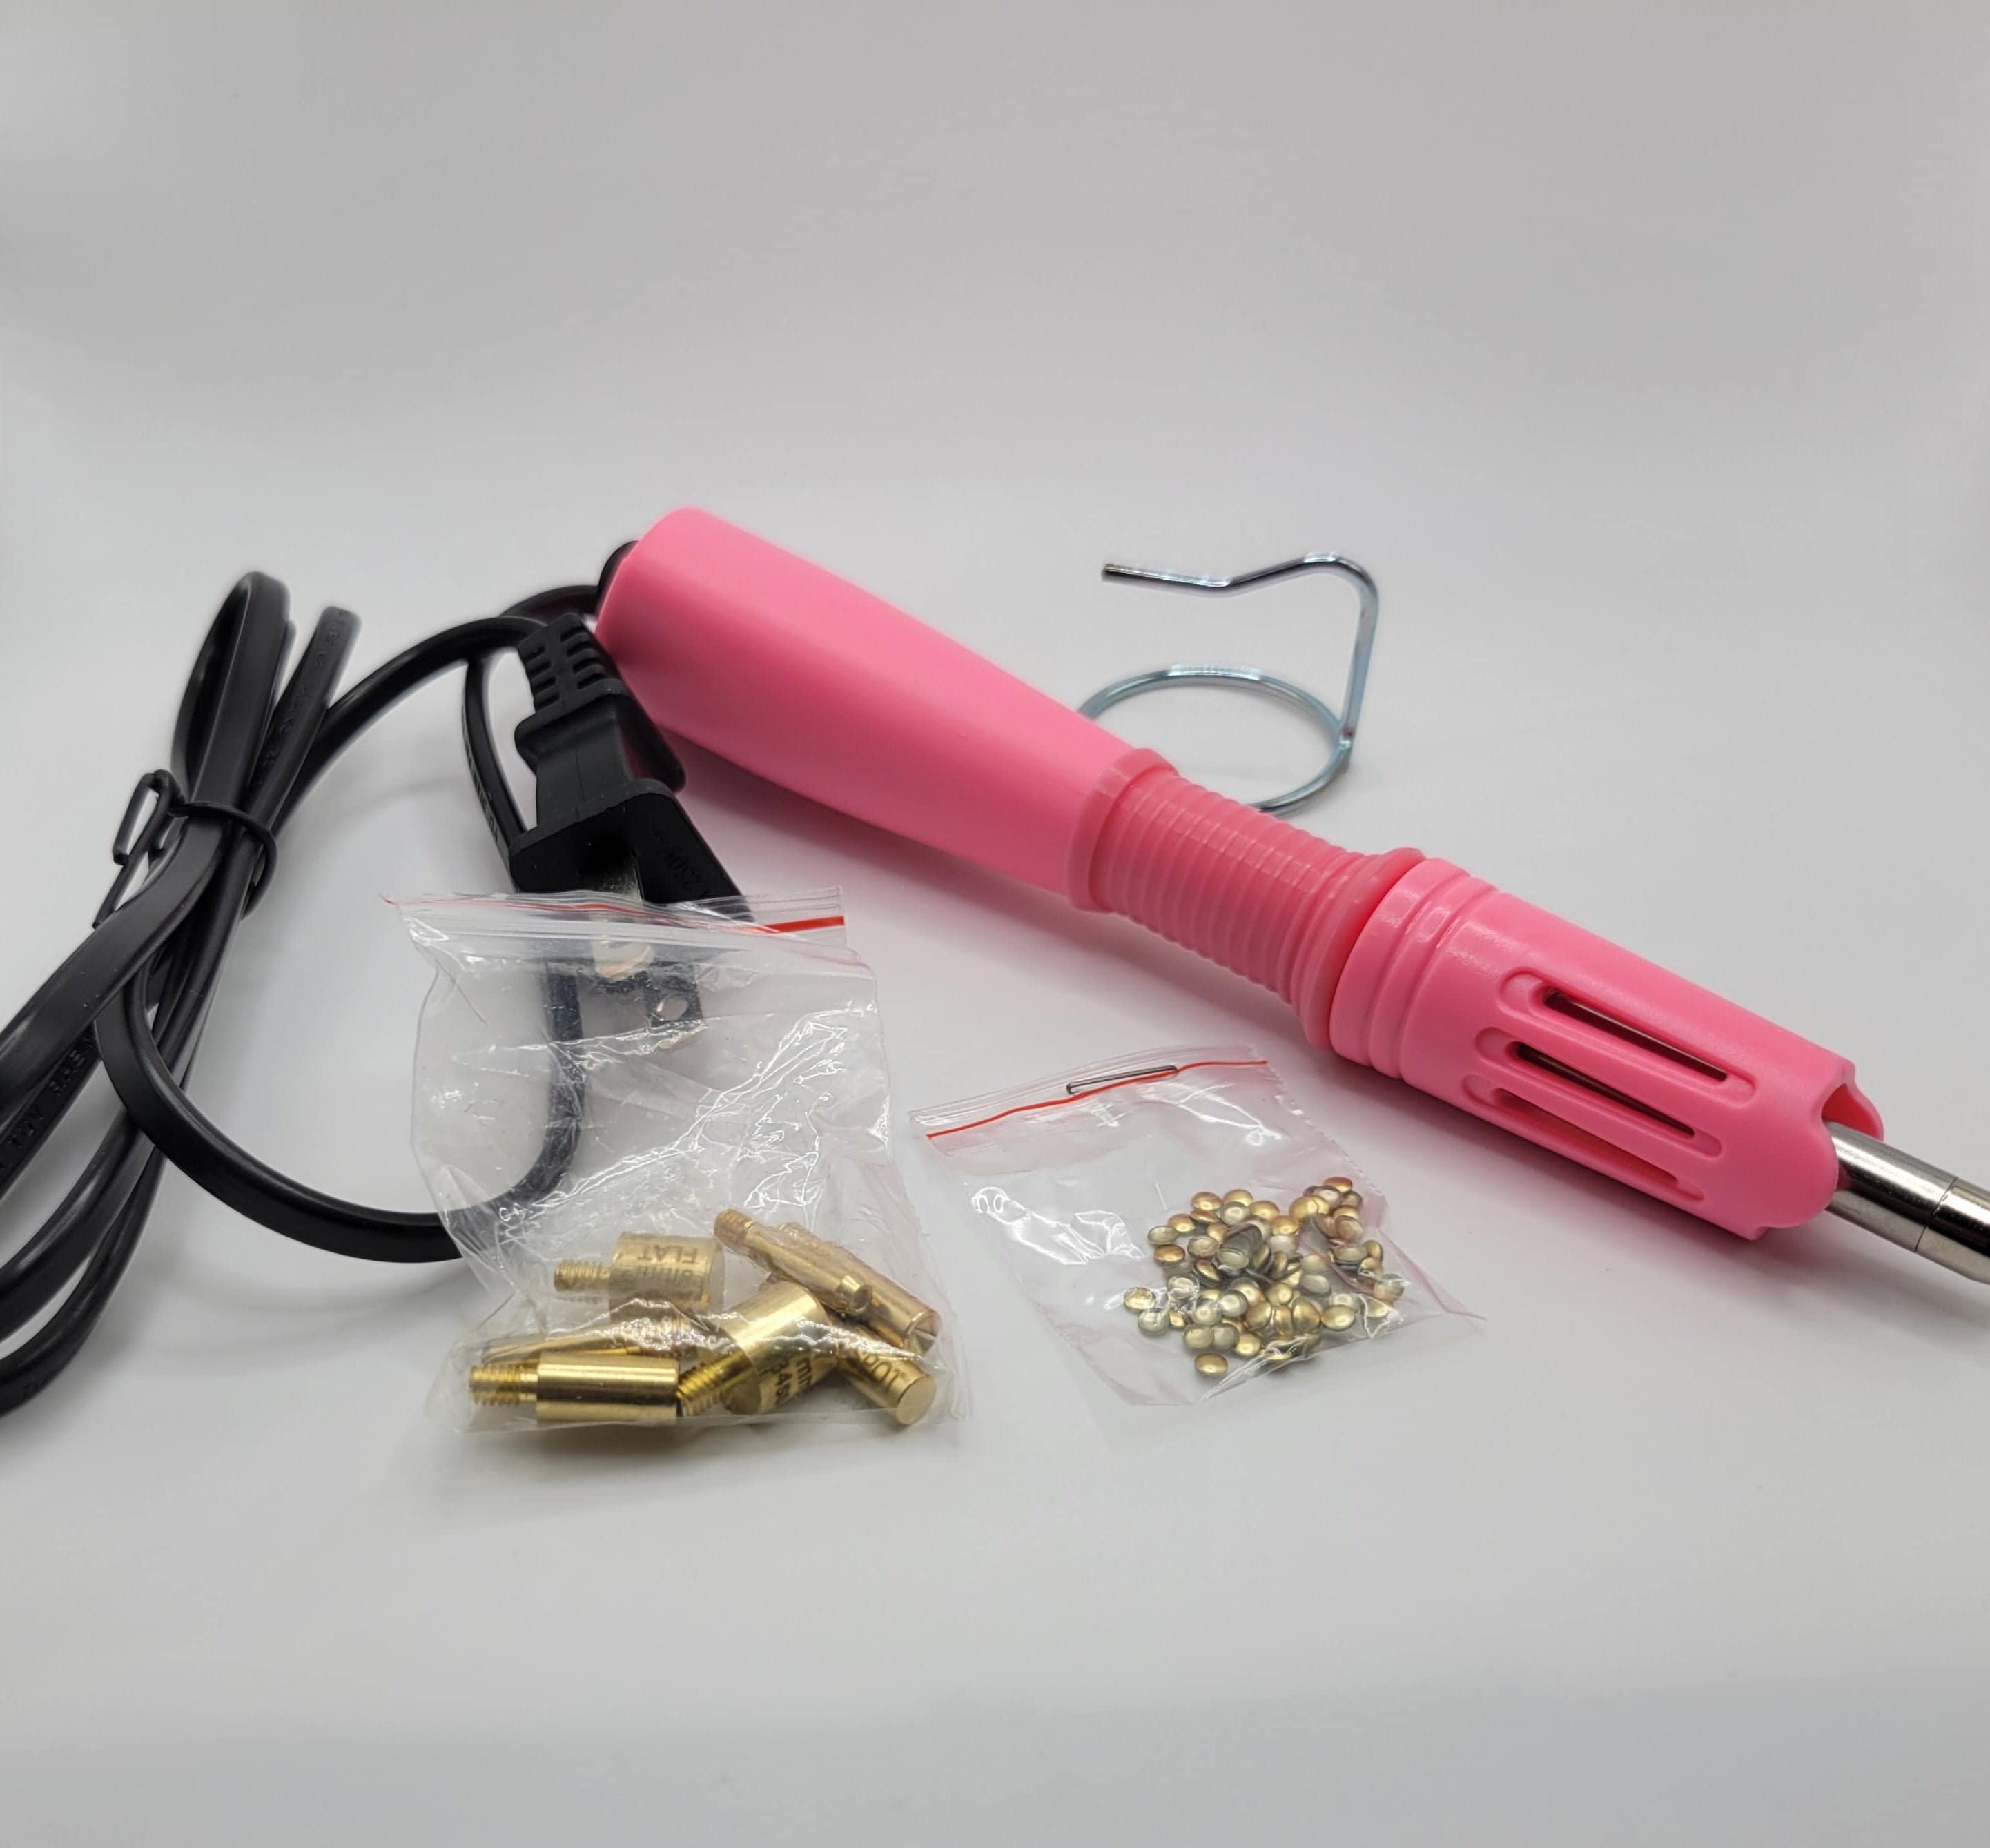 Hotfix applicator, Hot-Fix Heater™, plastic / steel / brass, pink / light  blue / black, 7-1/2 x 1-3/16 inches with 8 interchangeable tips, 120 volt,  6.5 watts. Sold individually. - Fire Mountain Gems and Beads